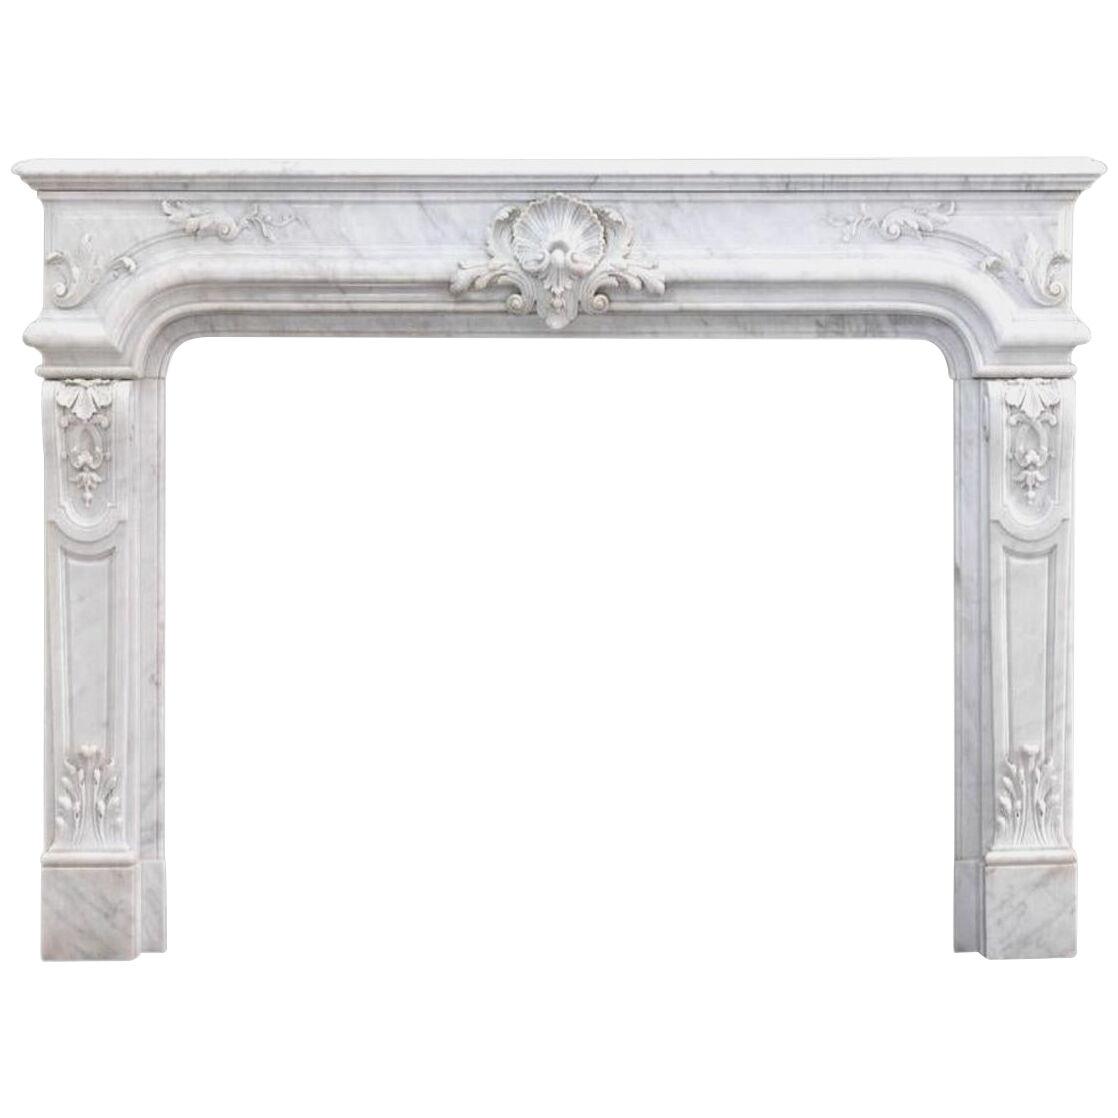 A Large Antique French Marble Fireplace Mantel